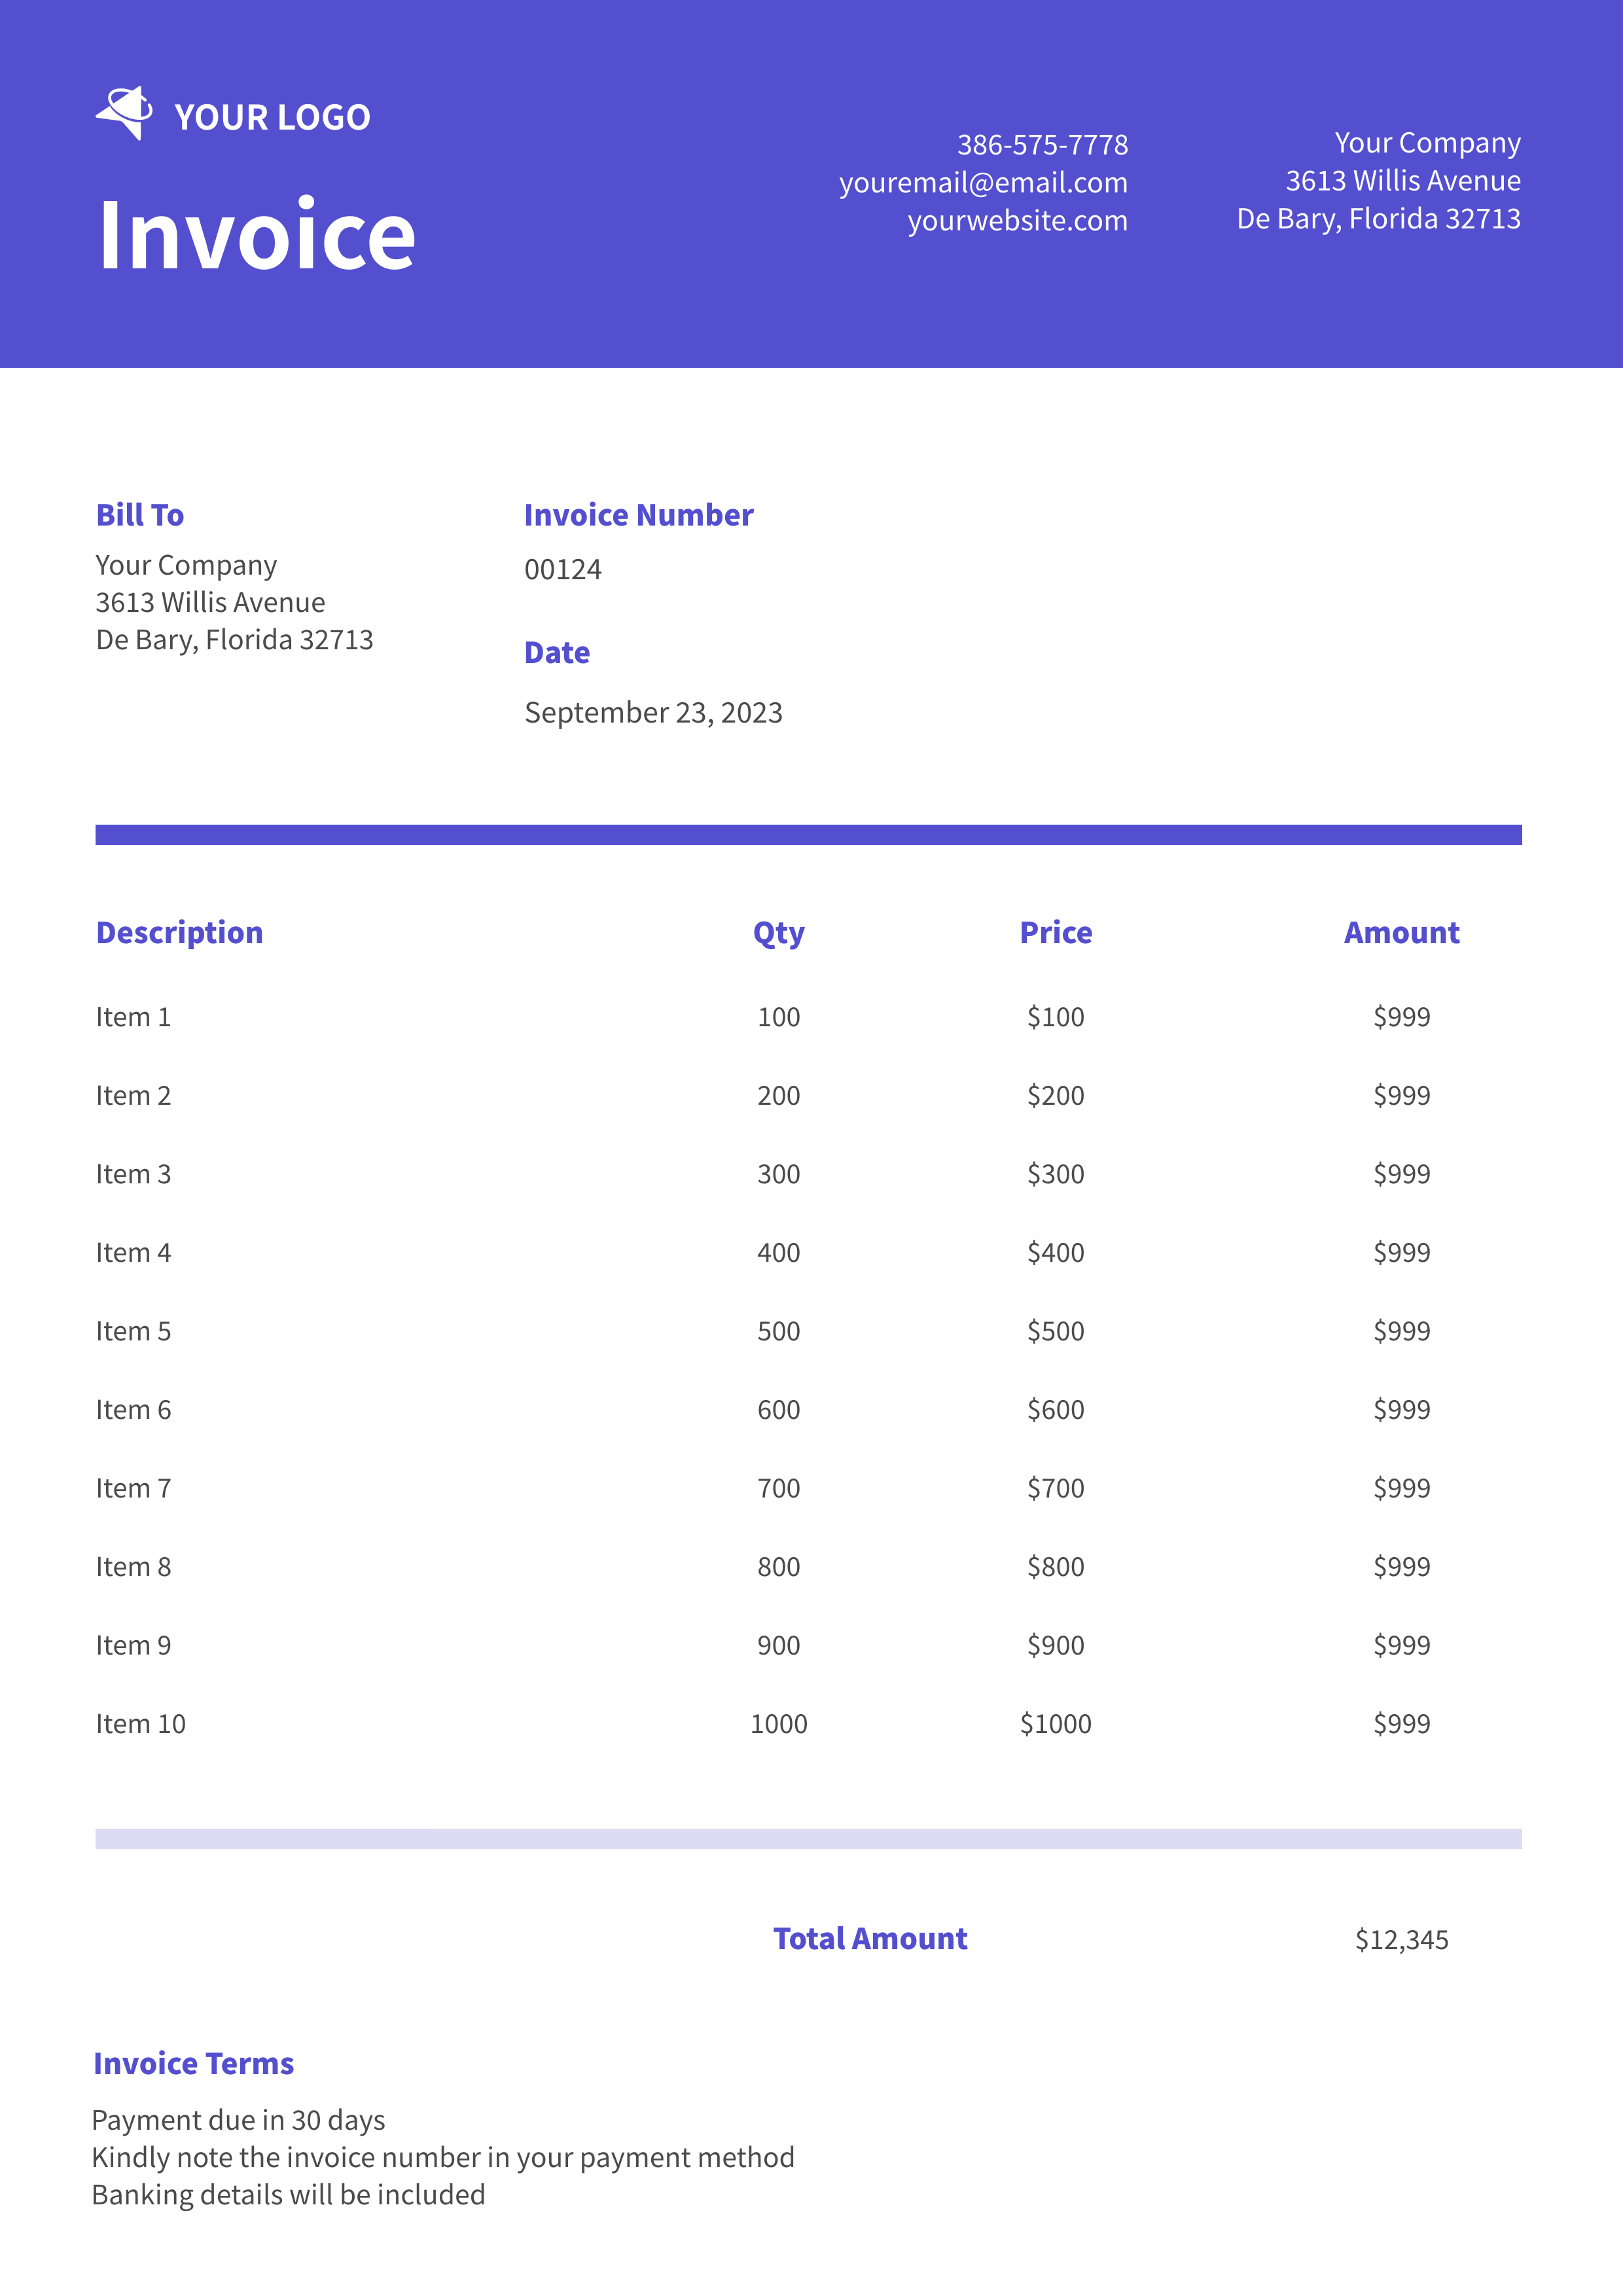 Bannerbear Invoice with Header template